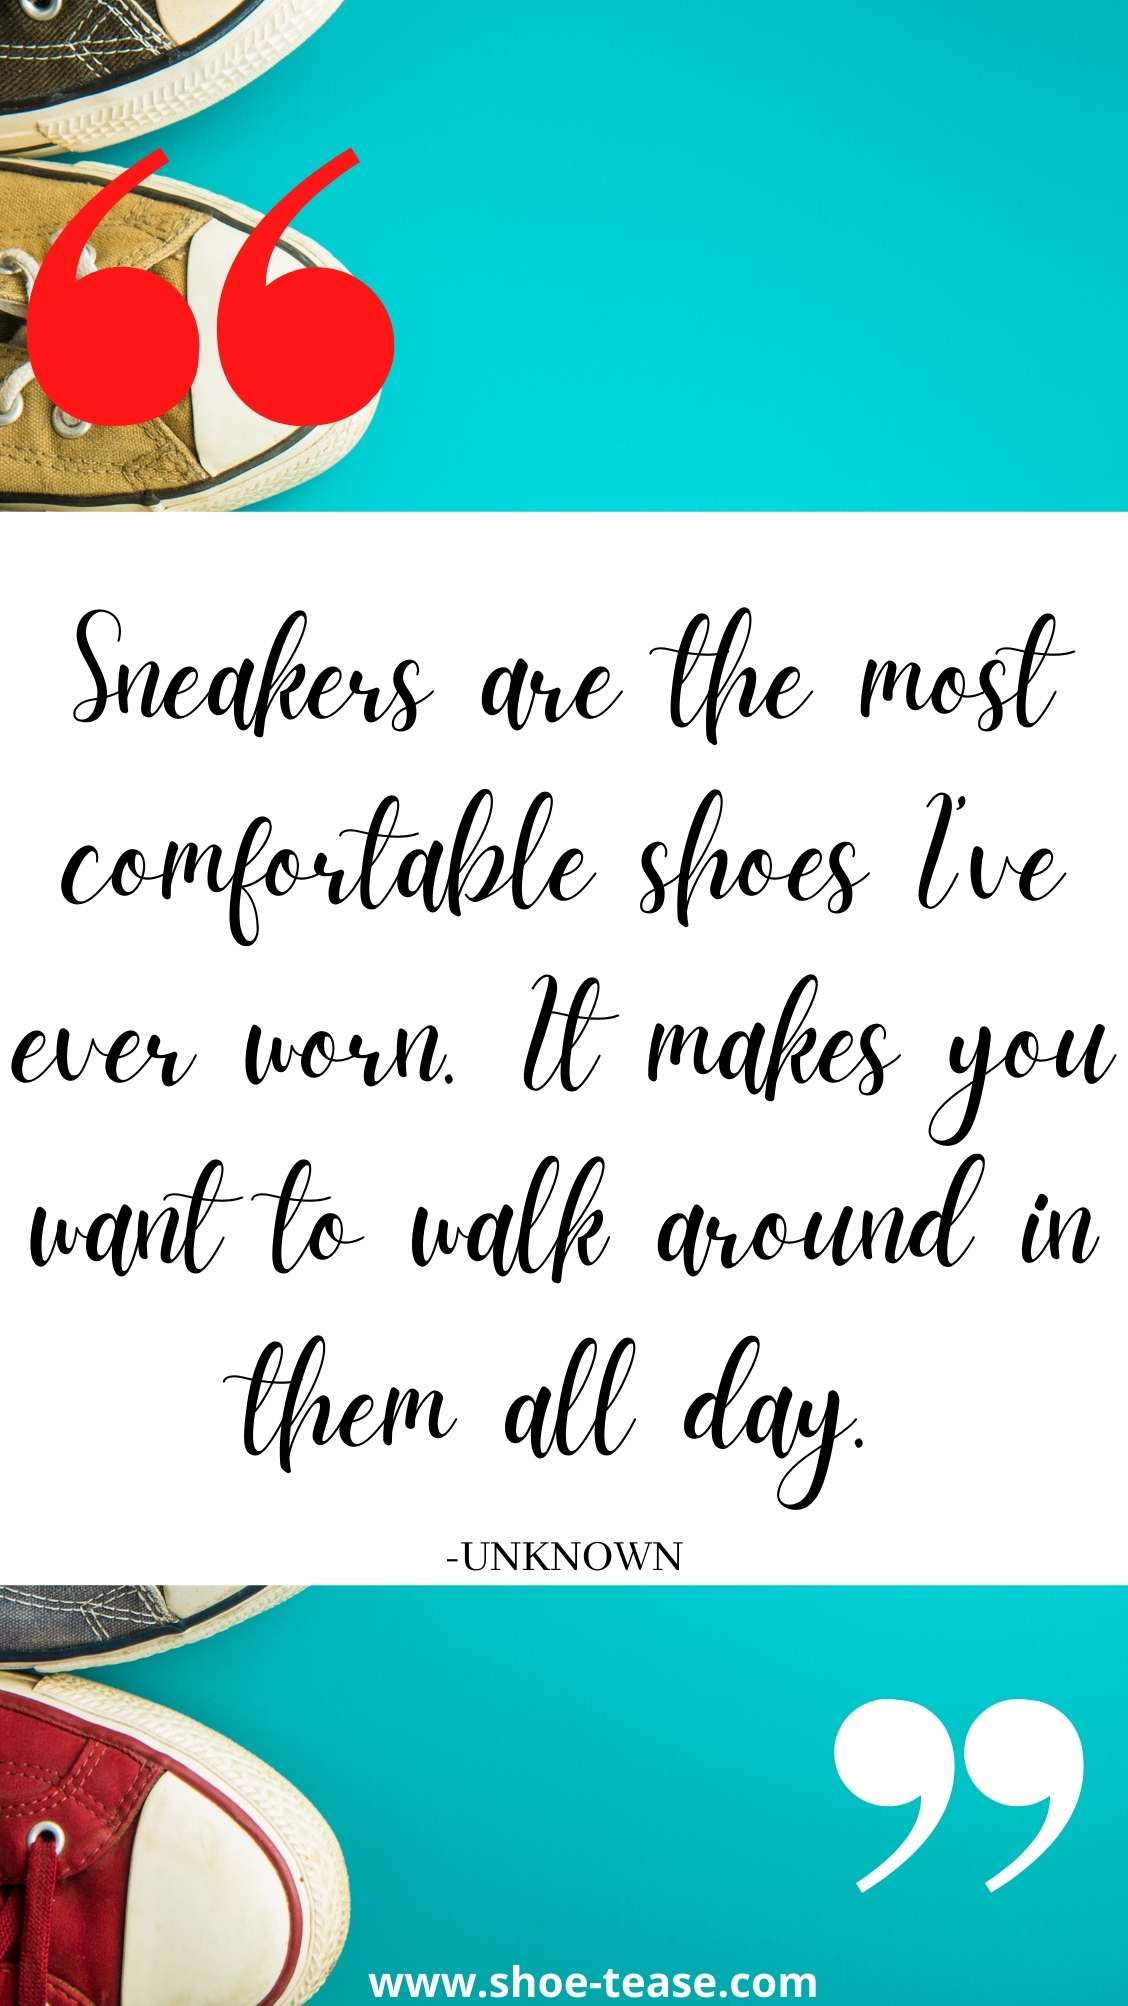 Sneakers Quote reading sneakers are the most comfortable shoes I've ever worn. It makes you want to walk in them all day.